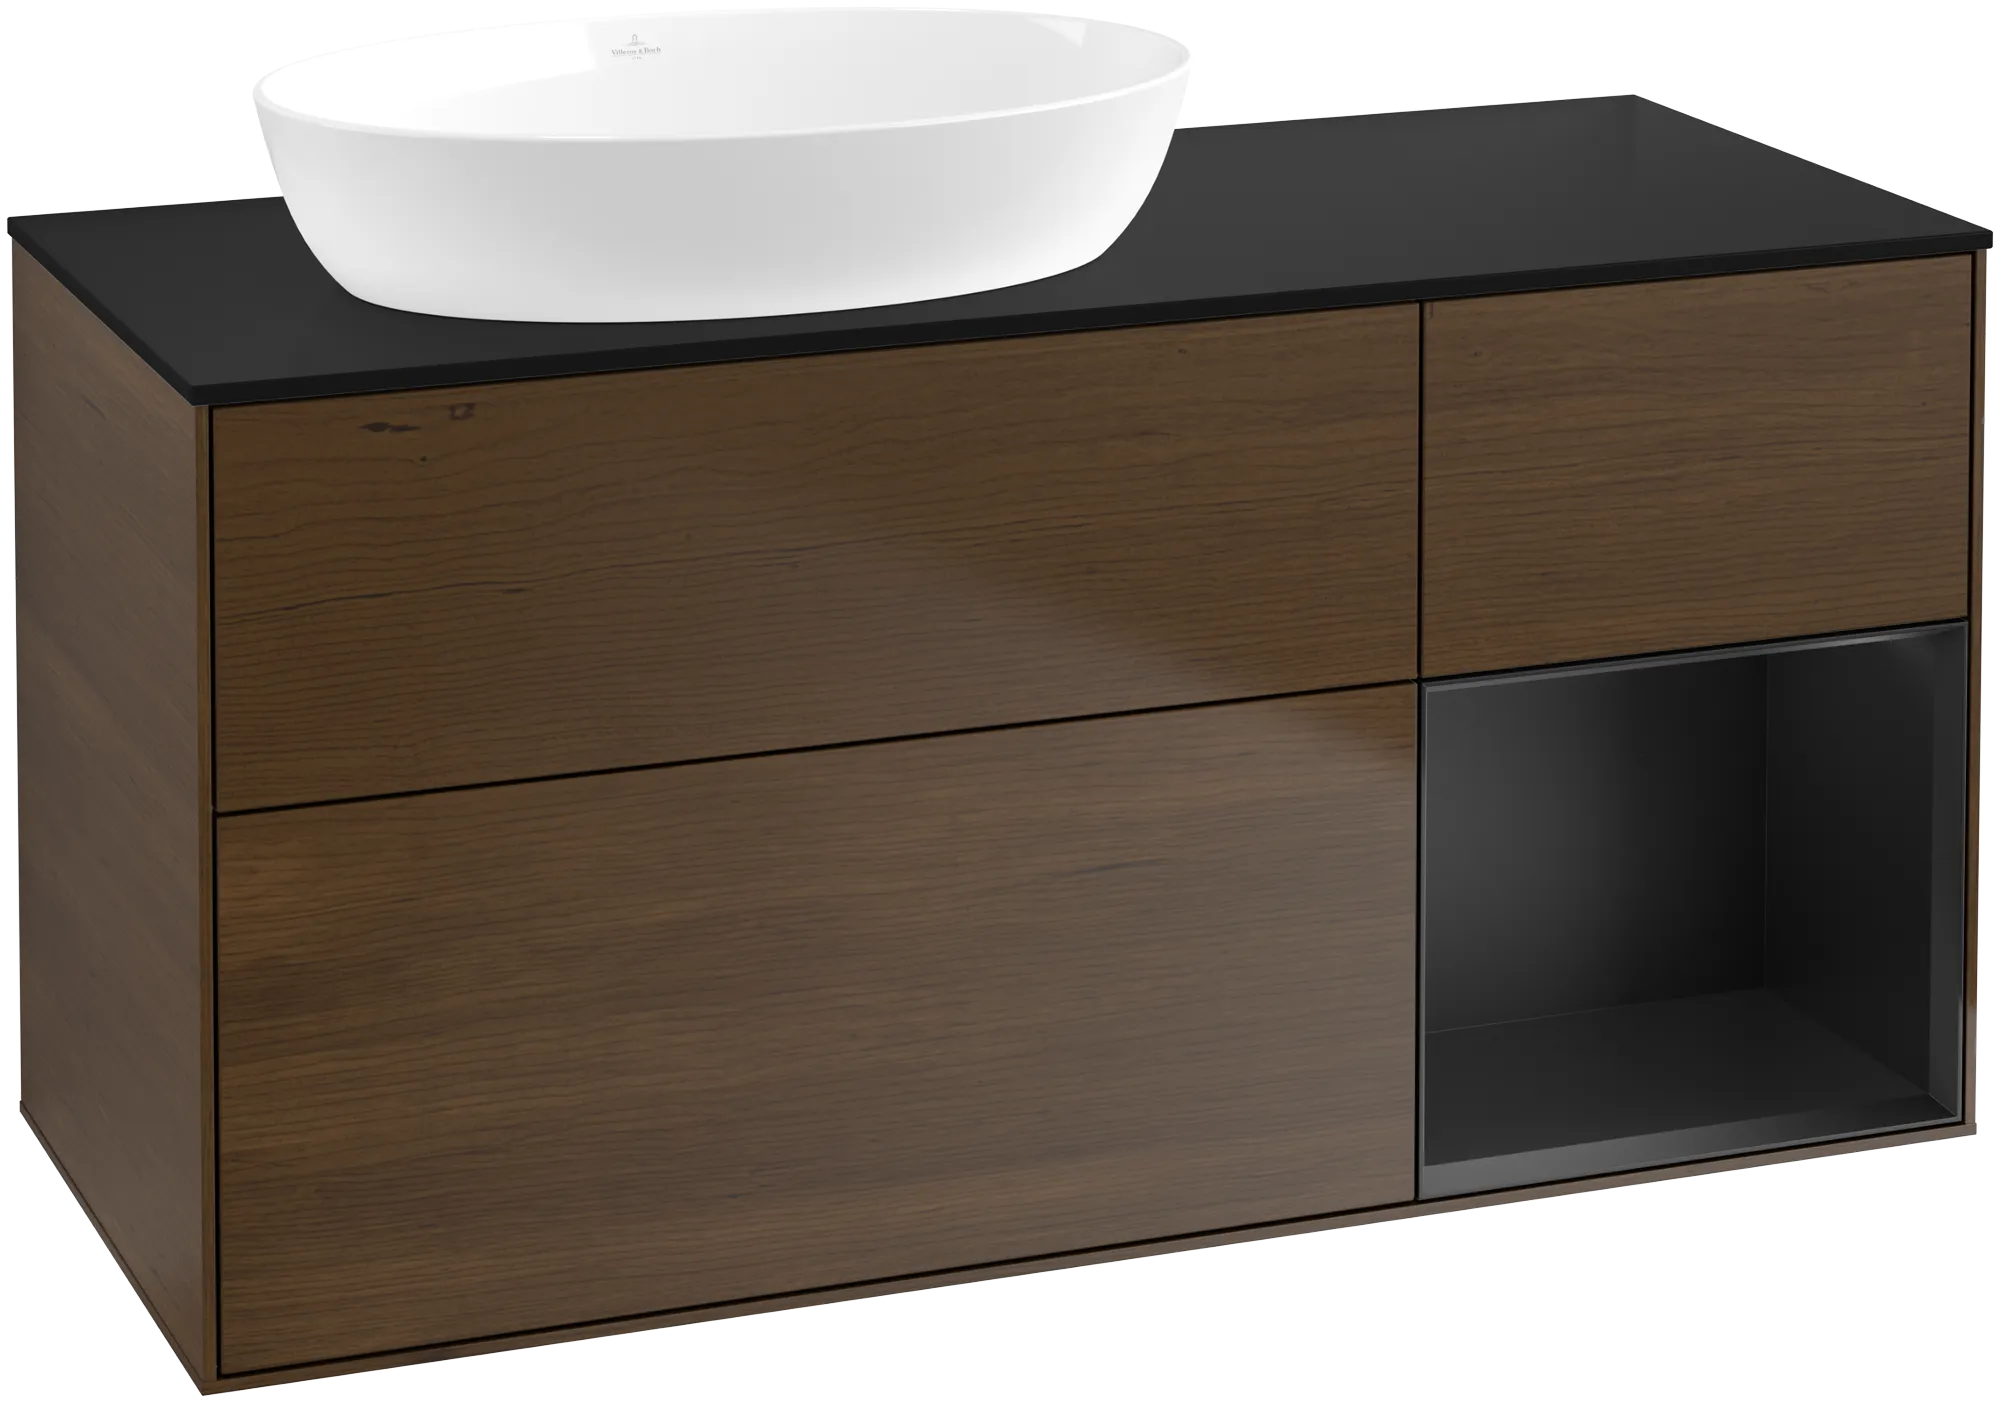 Picture of VILLEROY BOCH Finion Vanity unit, with lighting, 3 pull-out compartments, 1200 x 603 x 501 mm, Walnut Veneer / Black Matt Lacquer / Glass Black Matt #FA52PDGN